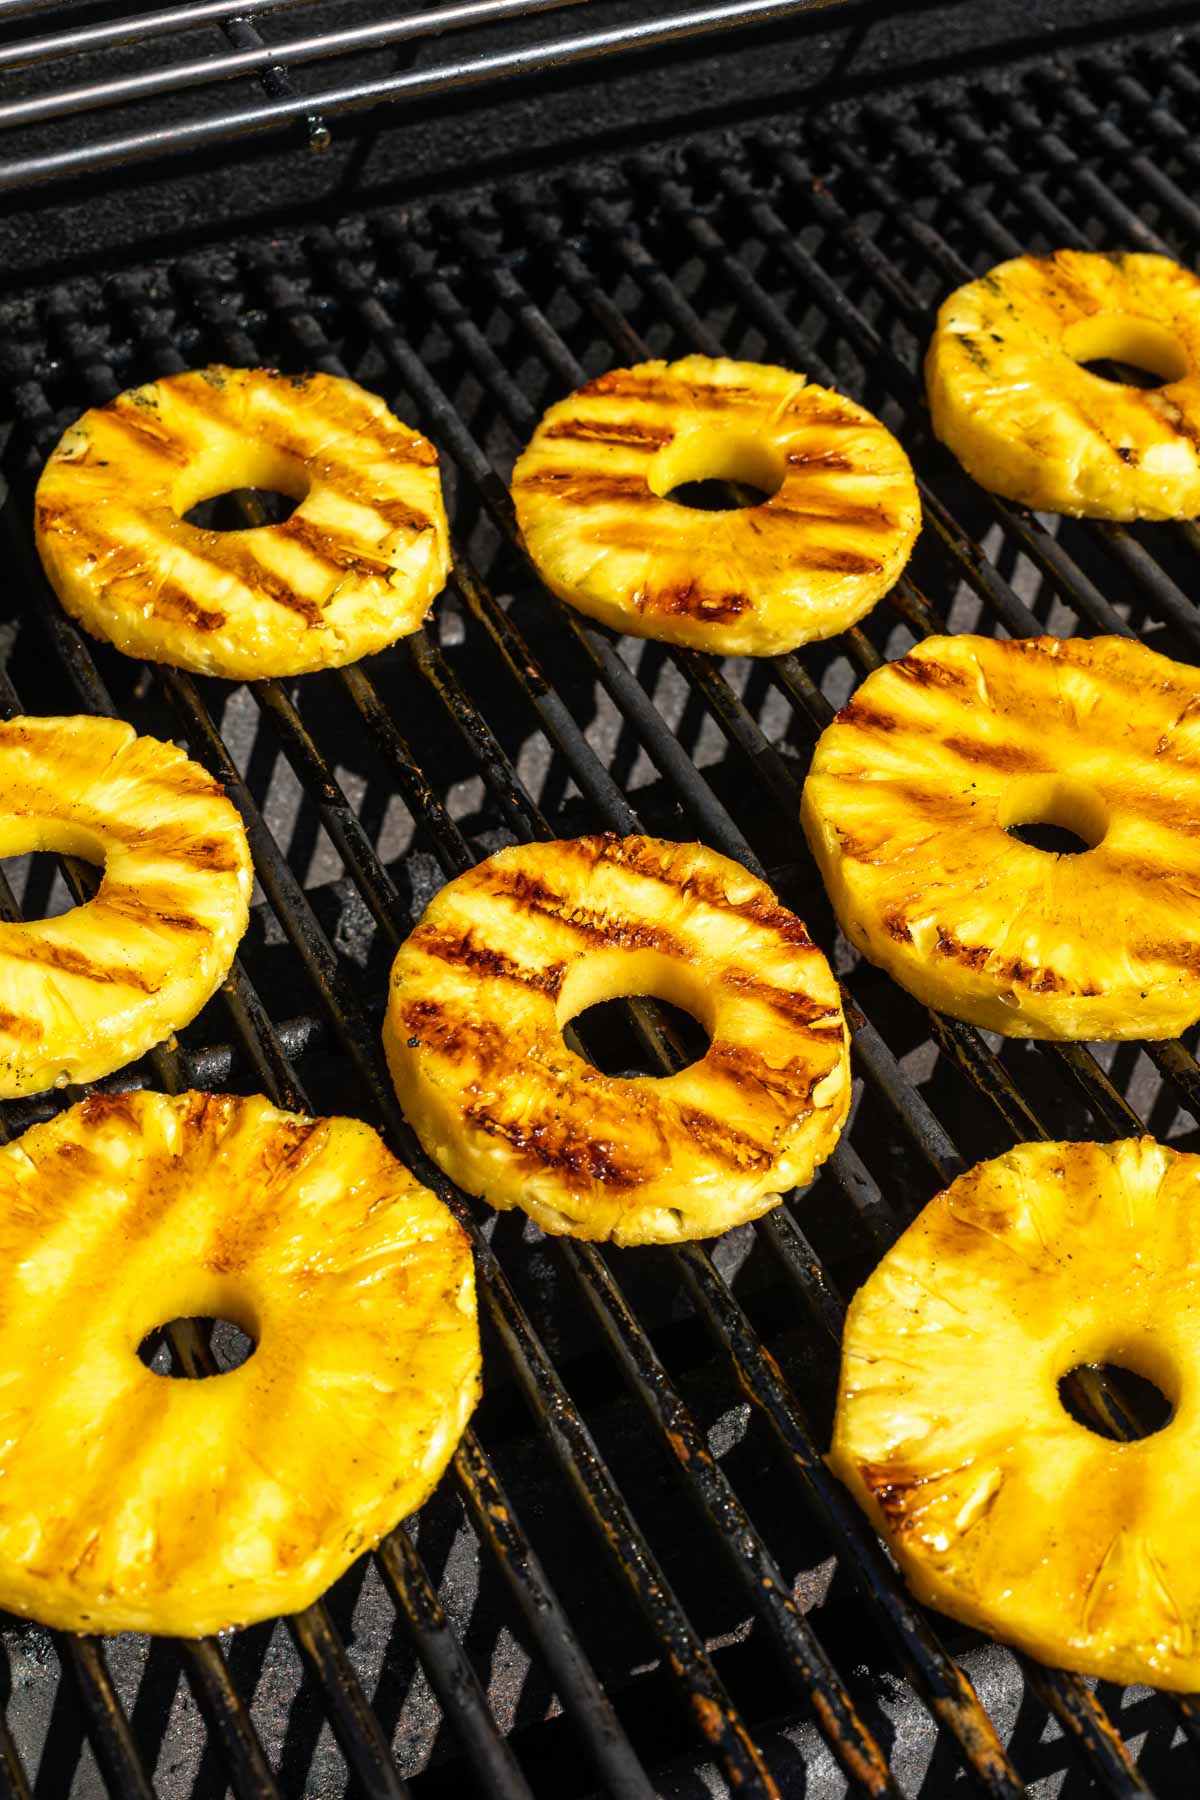 Pineapple slices with grill marks on a grill